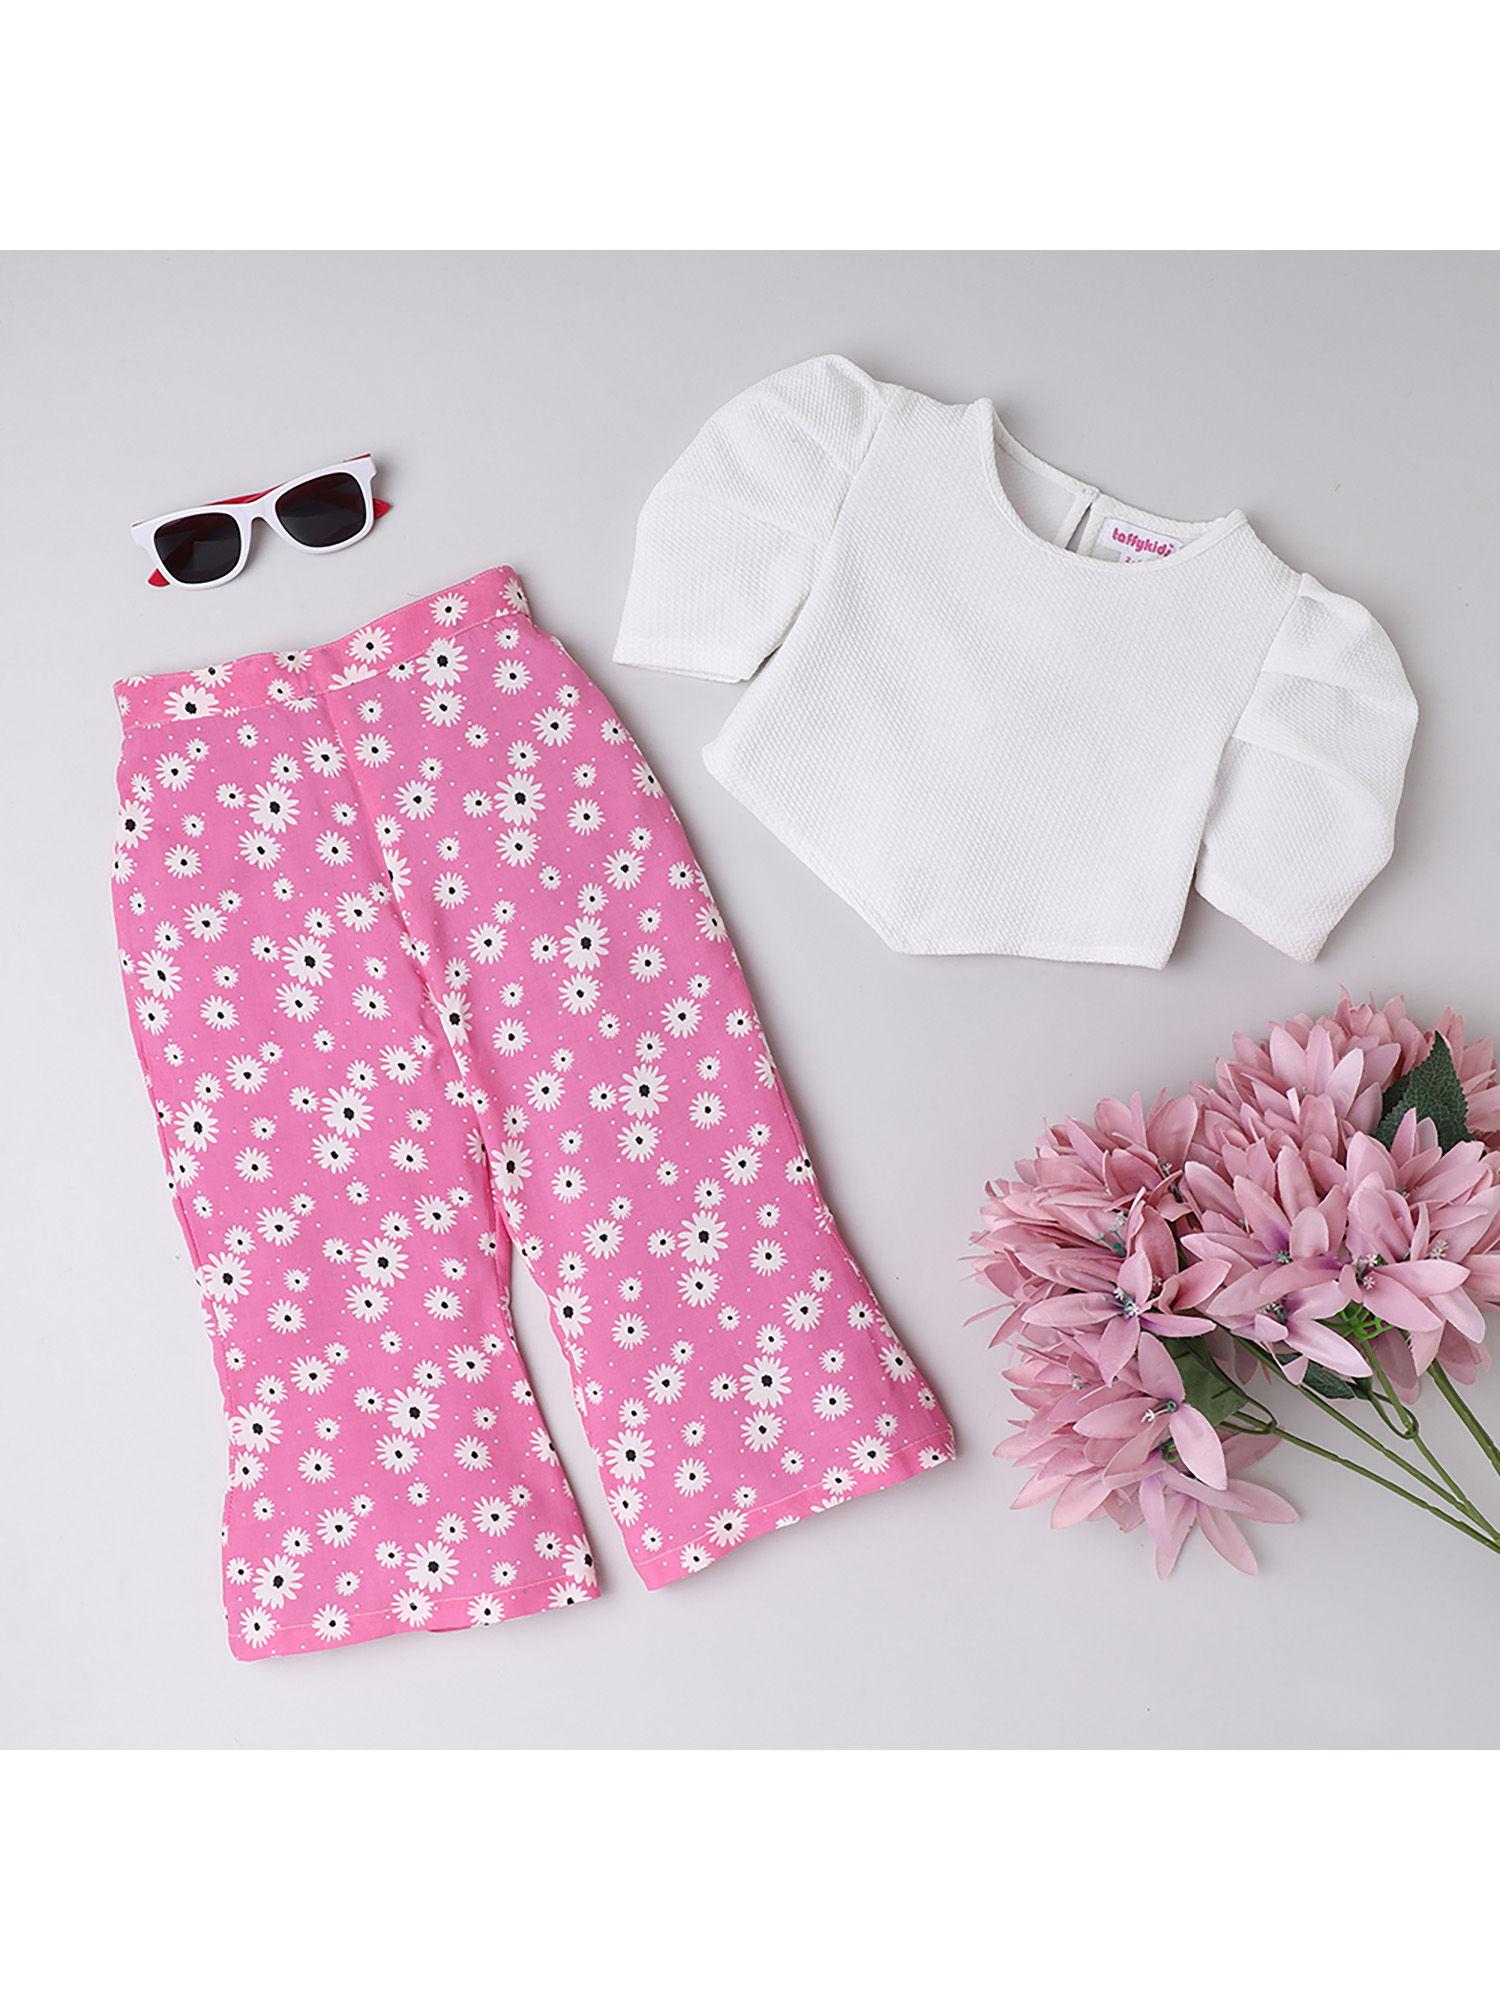 knit puff sleeves top and cotton floral printed pant - pink/ white (set of 2)